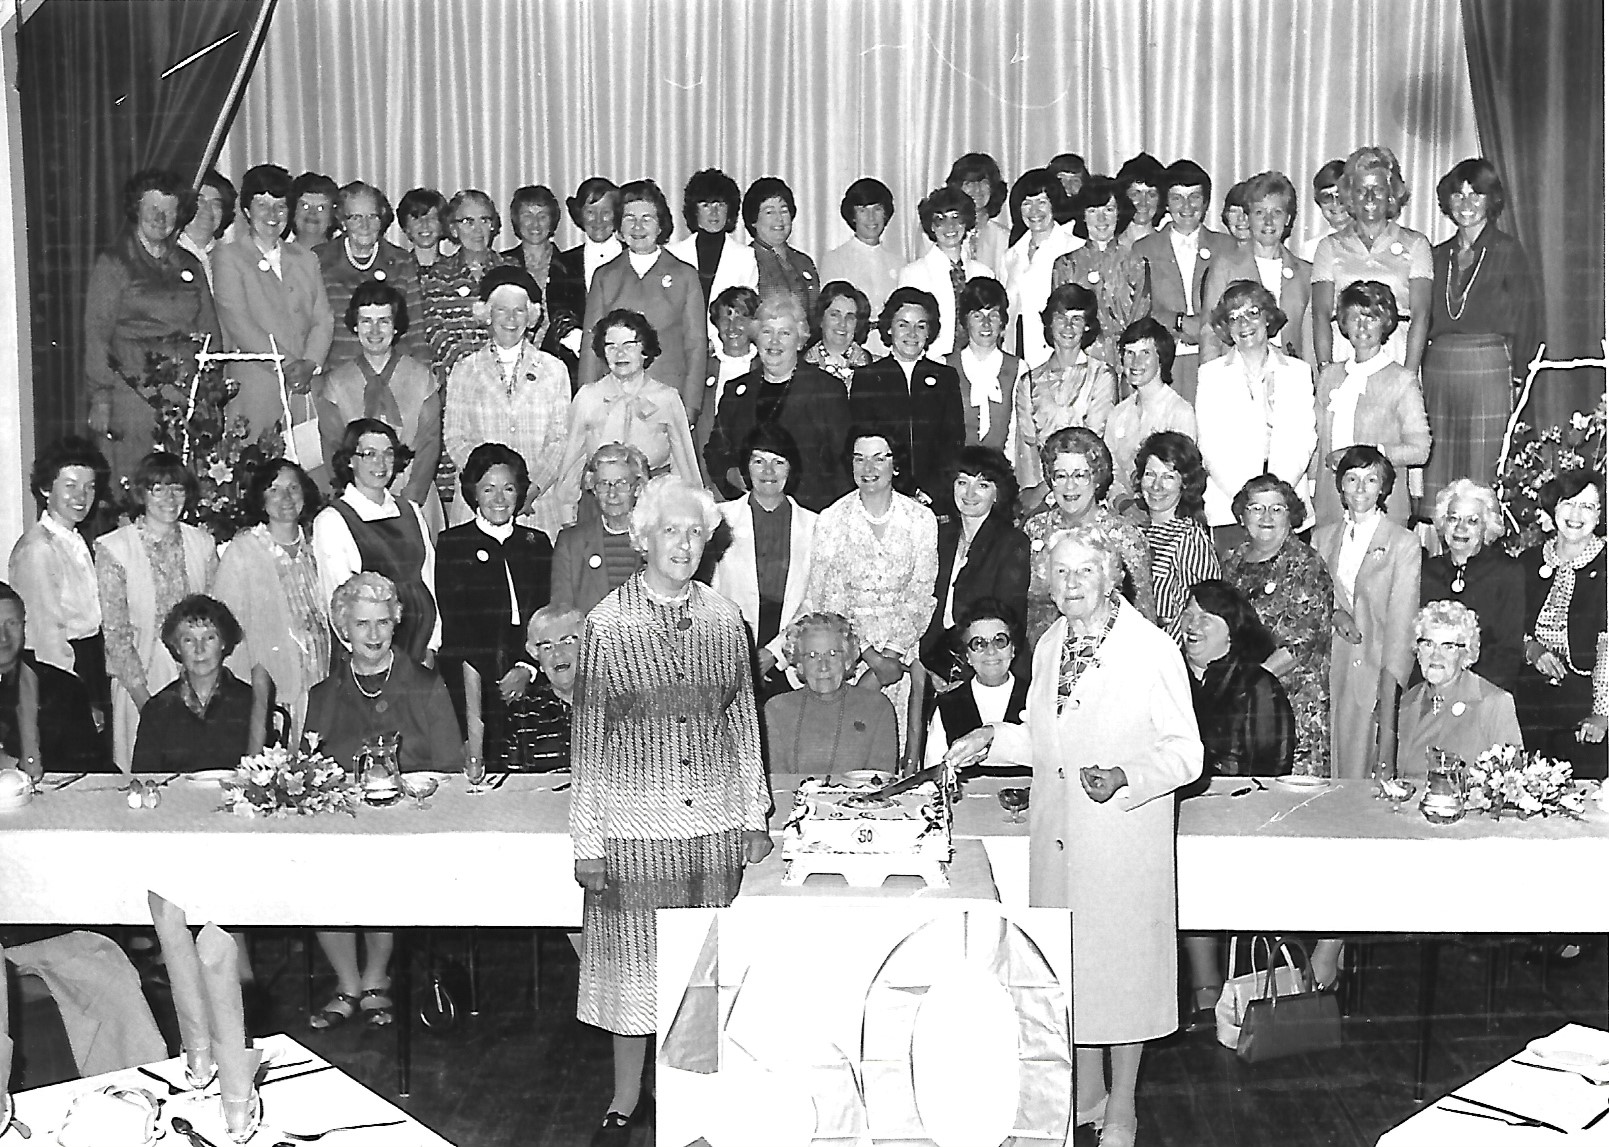 Members of the Brentwood Old Girls' Association enjoy a 50th birthday celebration in Southport in May 1982, as they cut the celebratory cake